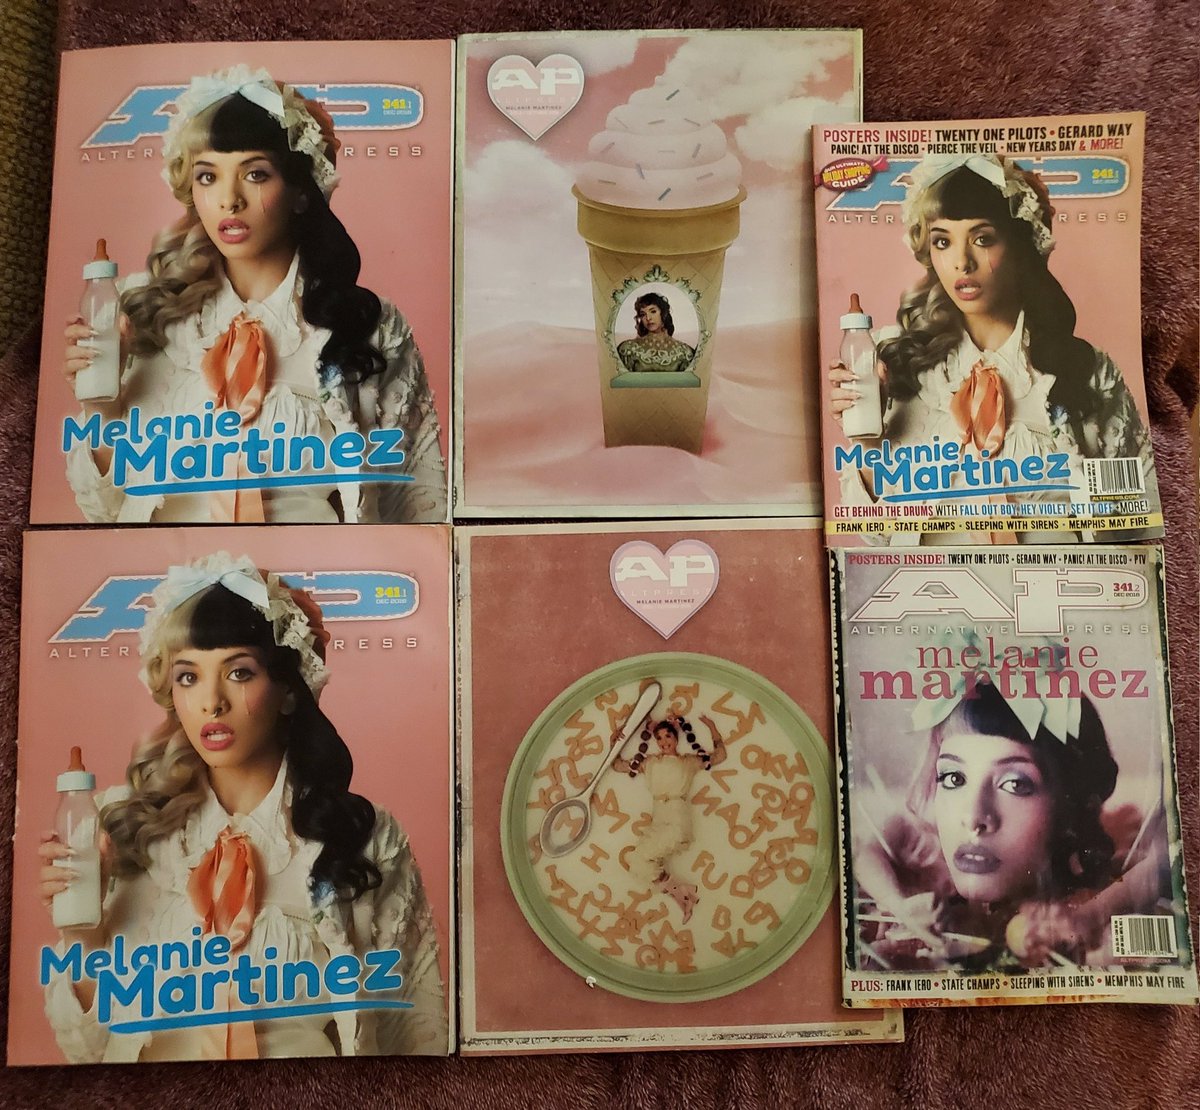 Thread of my Melanie Martinez collection 🧚🏼‍♀️💗

Starting with:

CD's and Alternative Press magazines